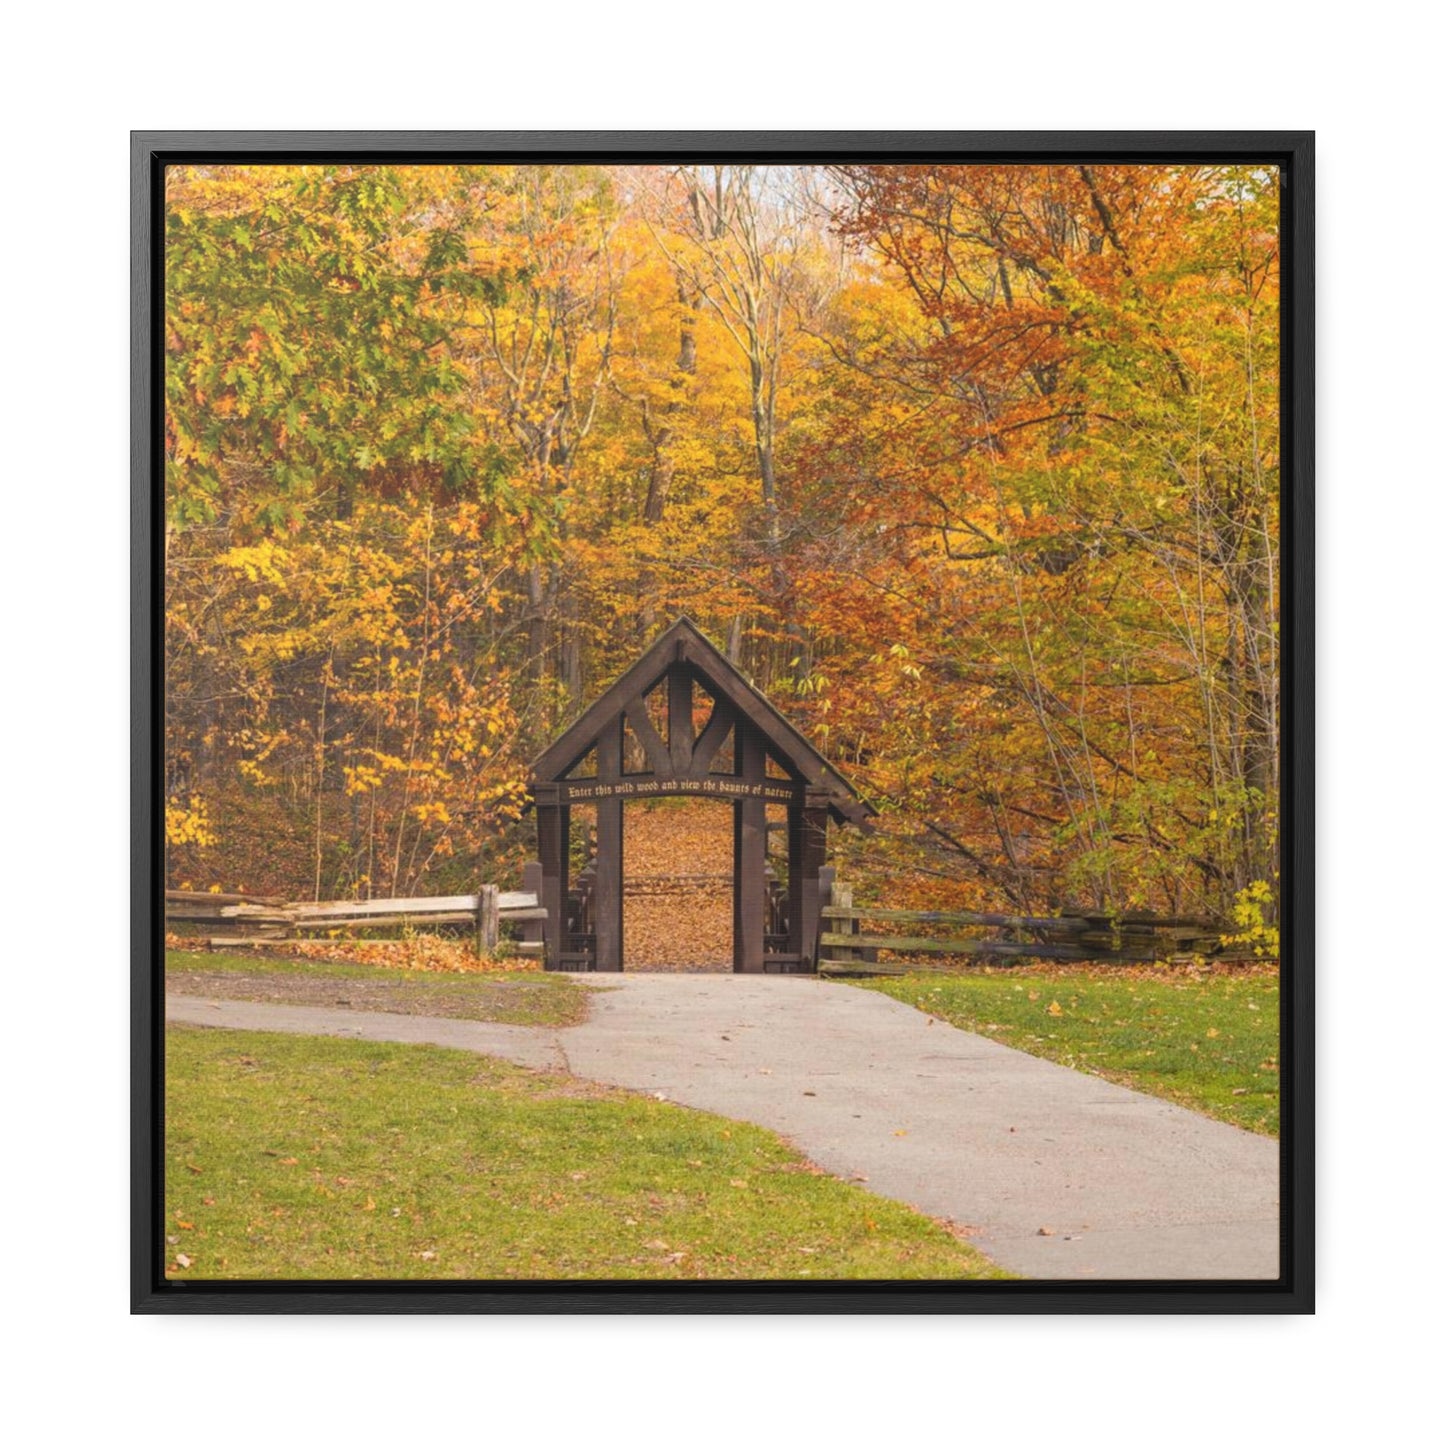 Seven Bridges Trail’s Covered Bridge at Grant Park in South Milwaukee Wisconsin, Photography Square Framed Canvas Wrap Wall Art